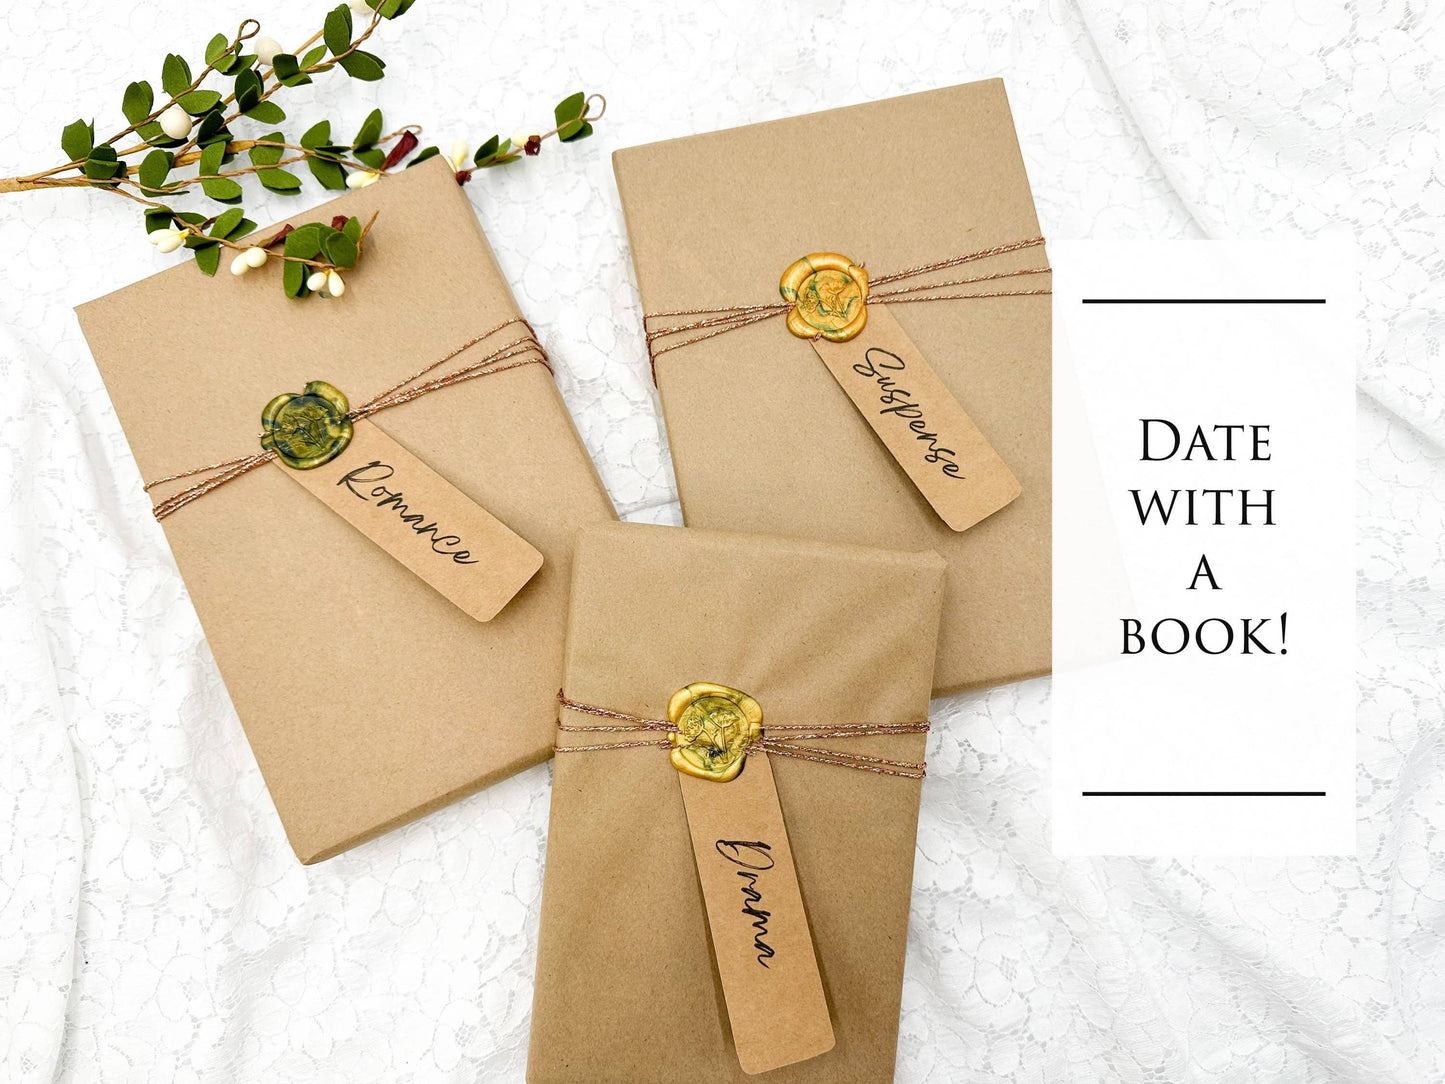 A House of Books - Surprise Book Blind Date with a Book -Mystery